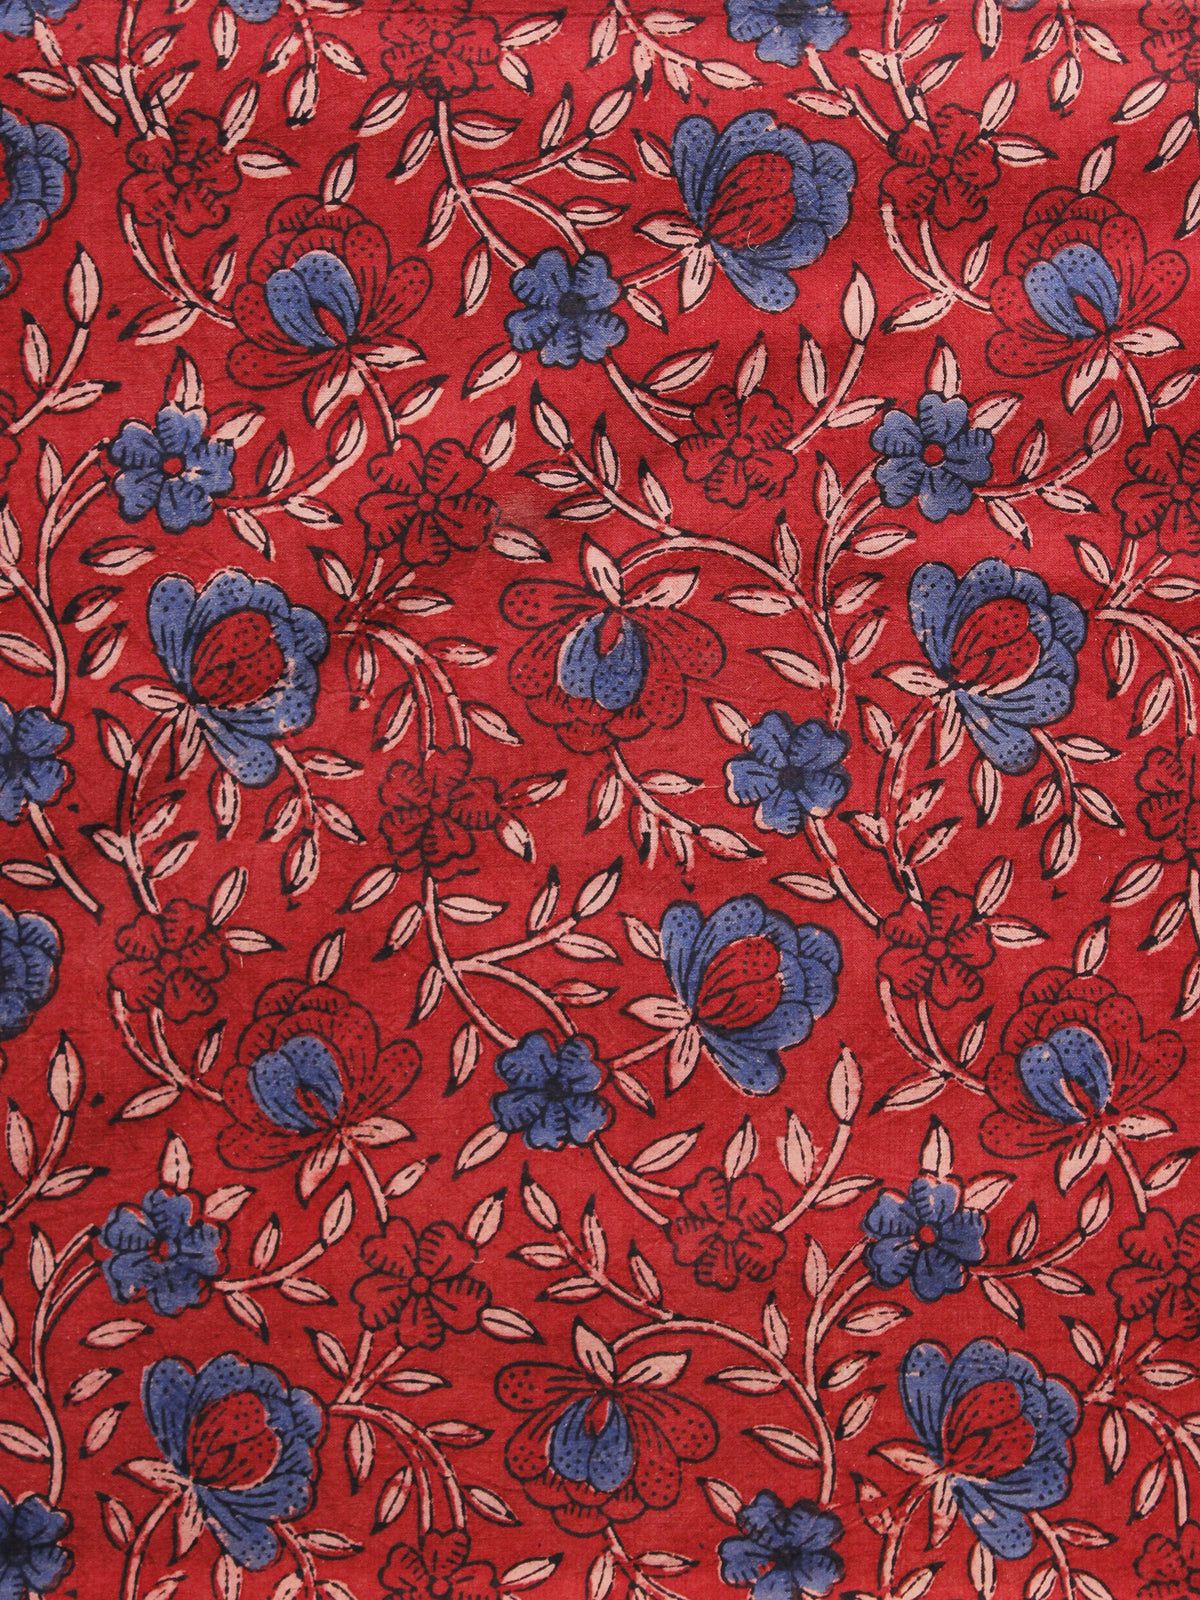 Red Maroon Blue Beige Ajrakh Hand Block Printed Cotton Blouse Fabric - BPA083